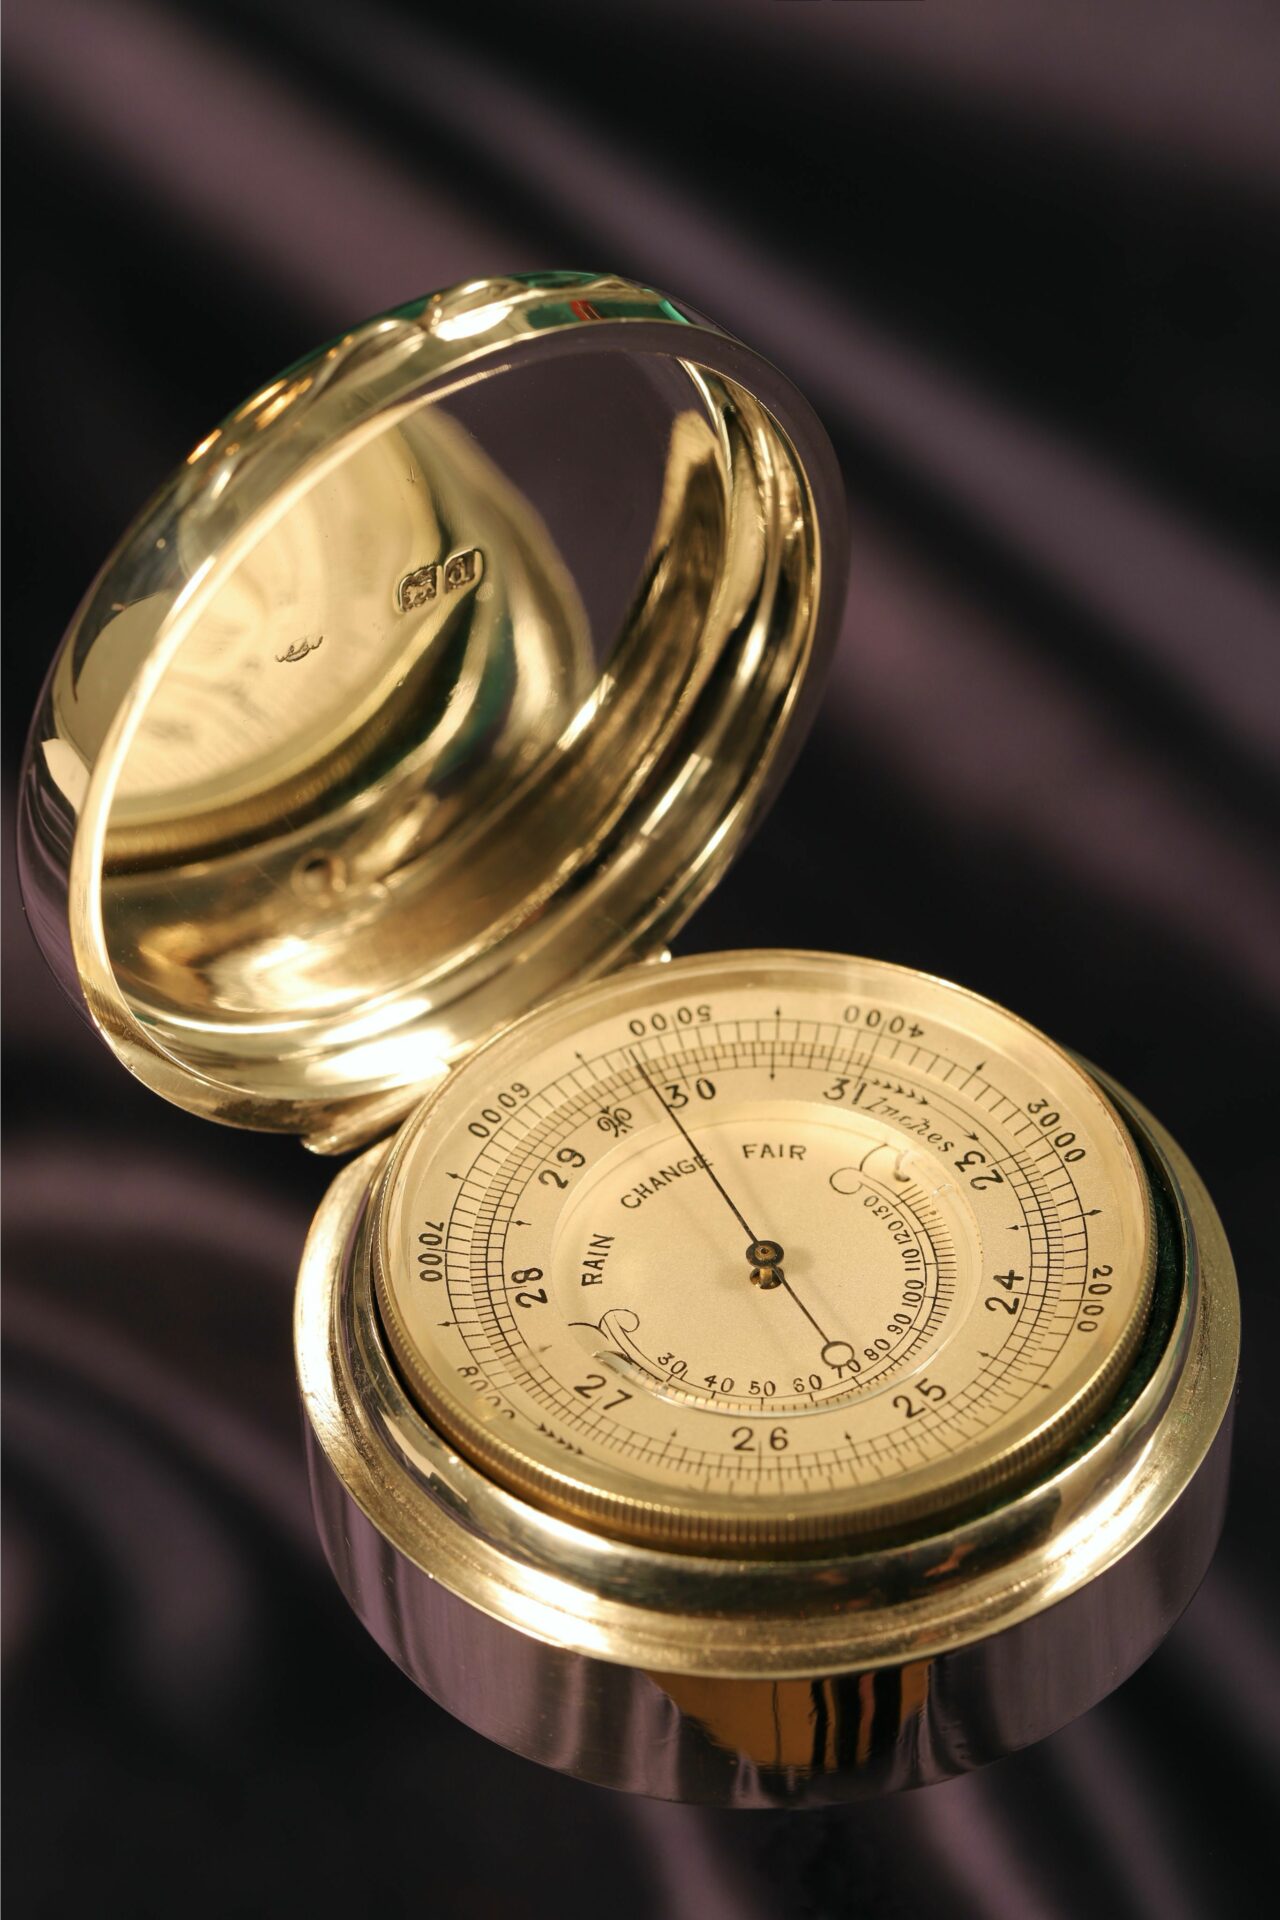 Image taken from left of the open case for Silver Pocket Barometer Compendium by Thornhill c1899 showing the dial and the inner lid hallmarks